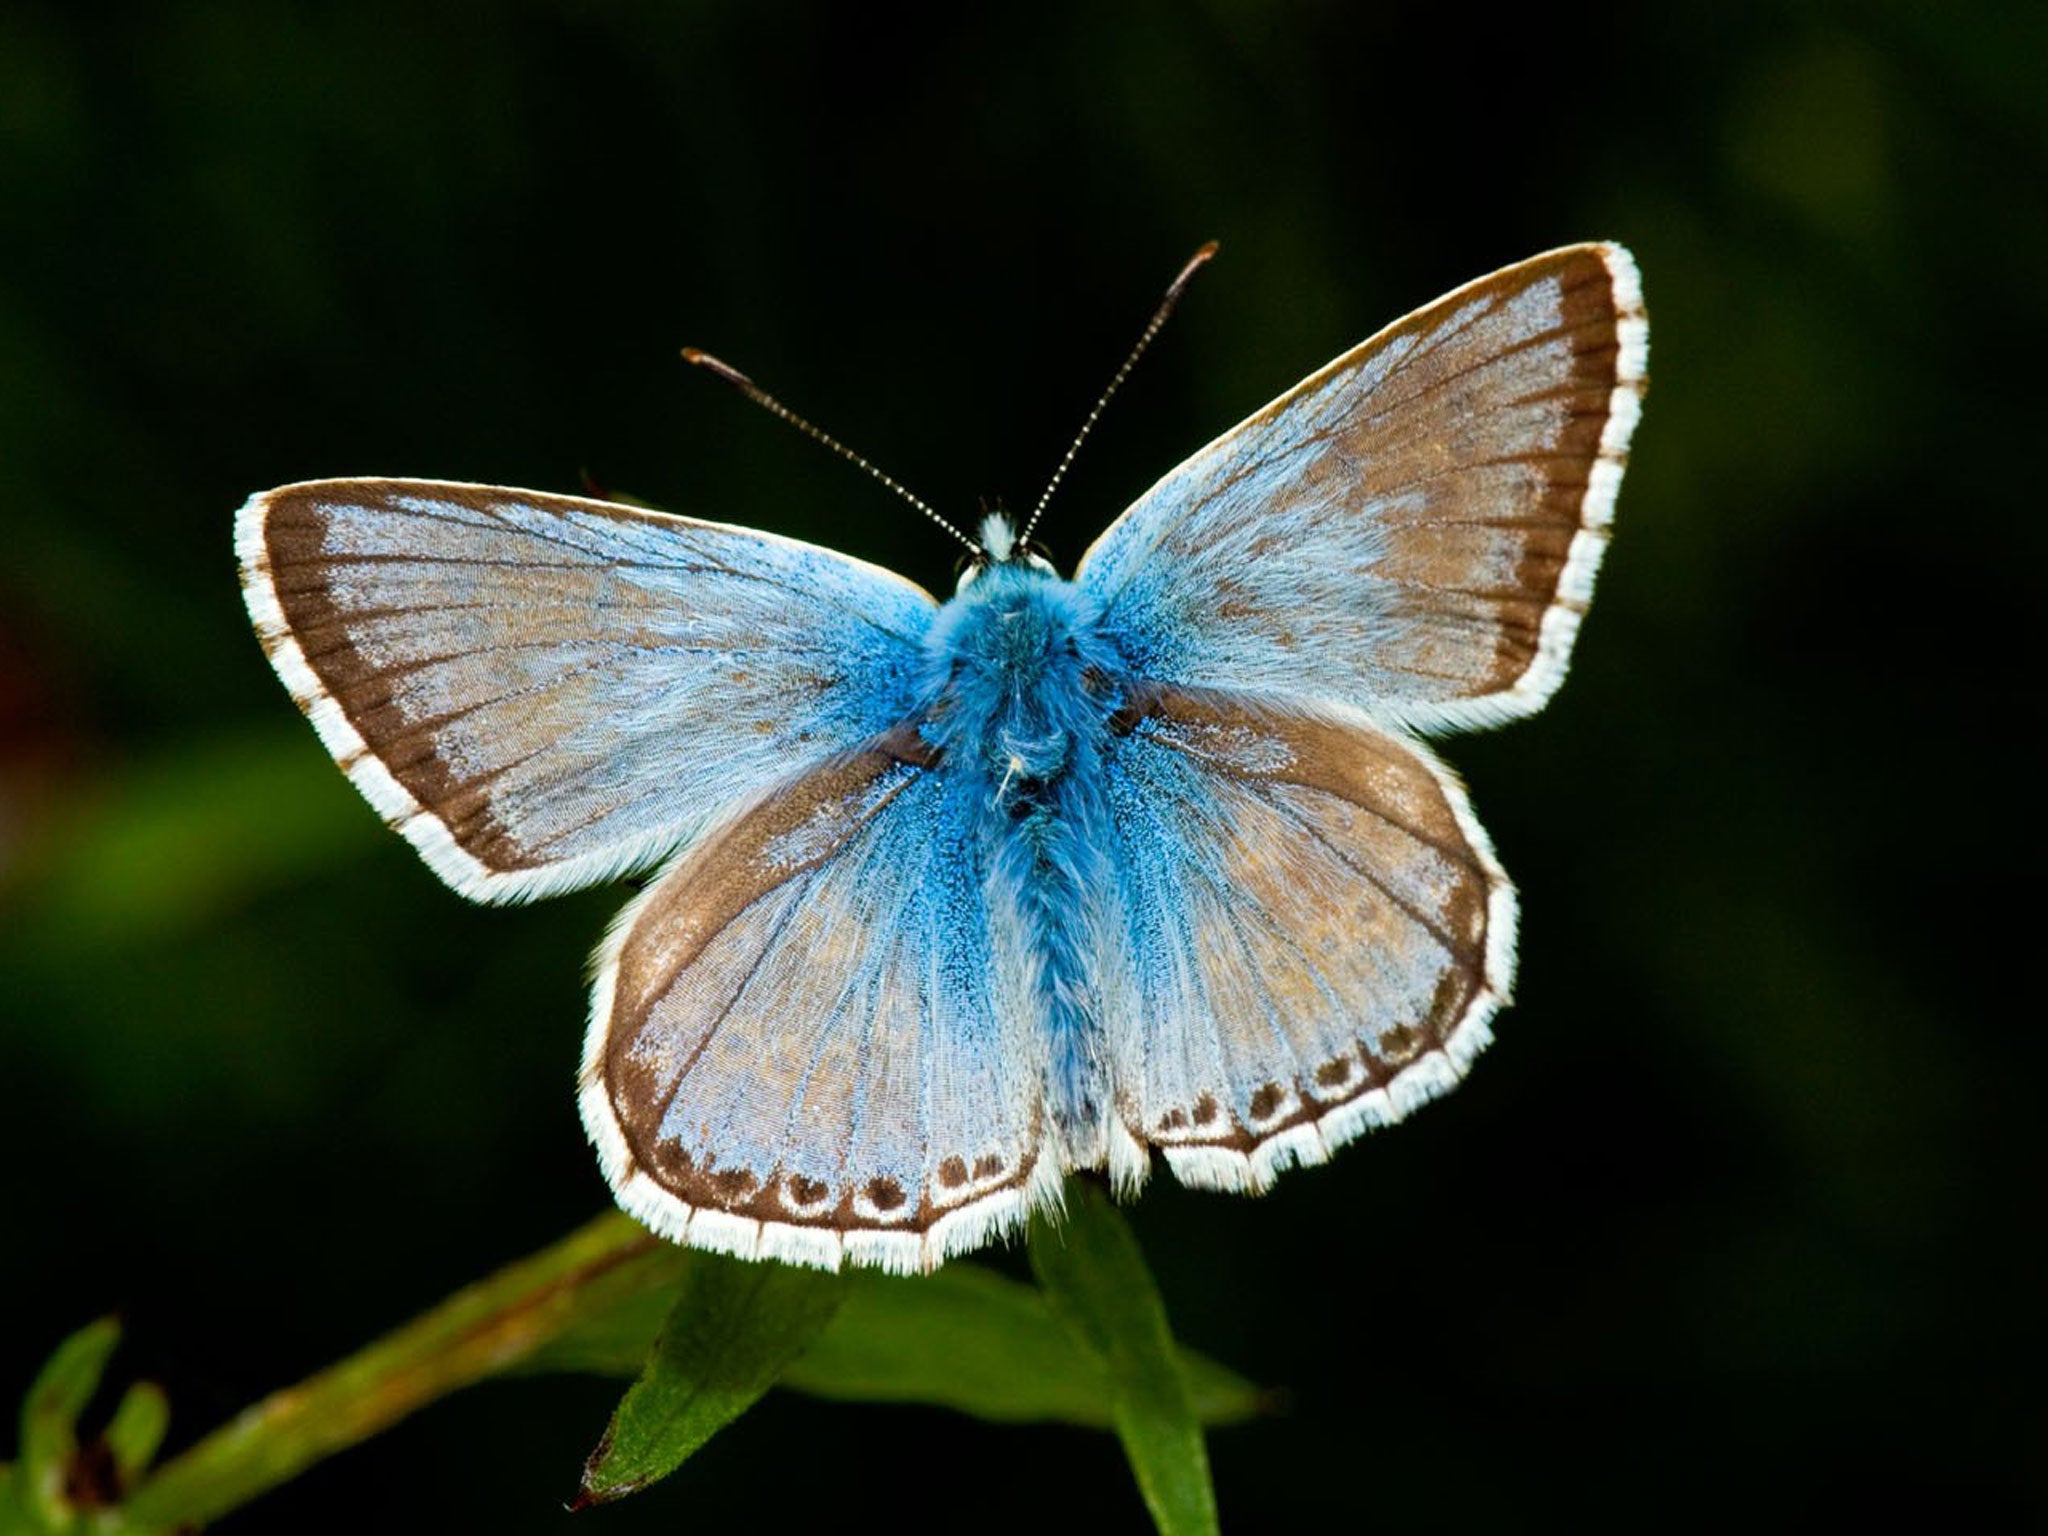 The chalkhill blue butterfly population has exploded on many of Britain's downs in July